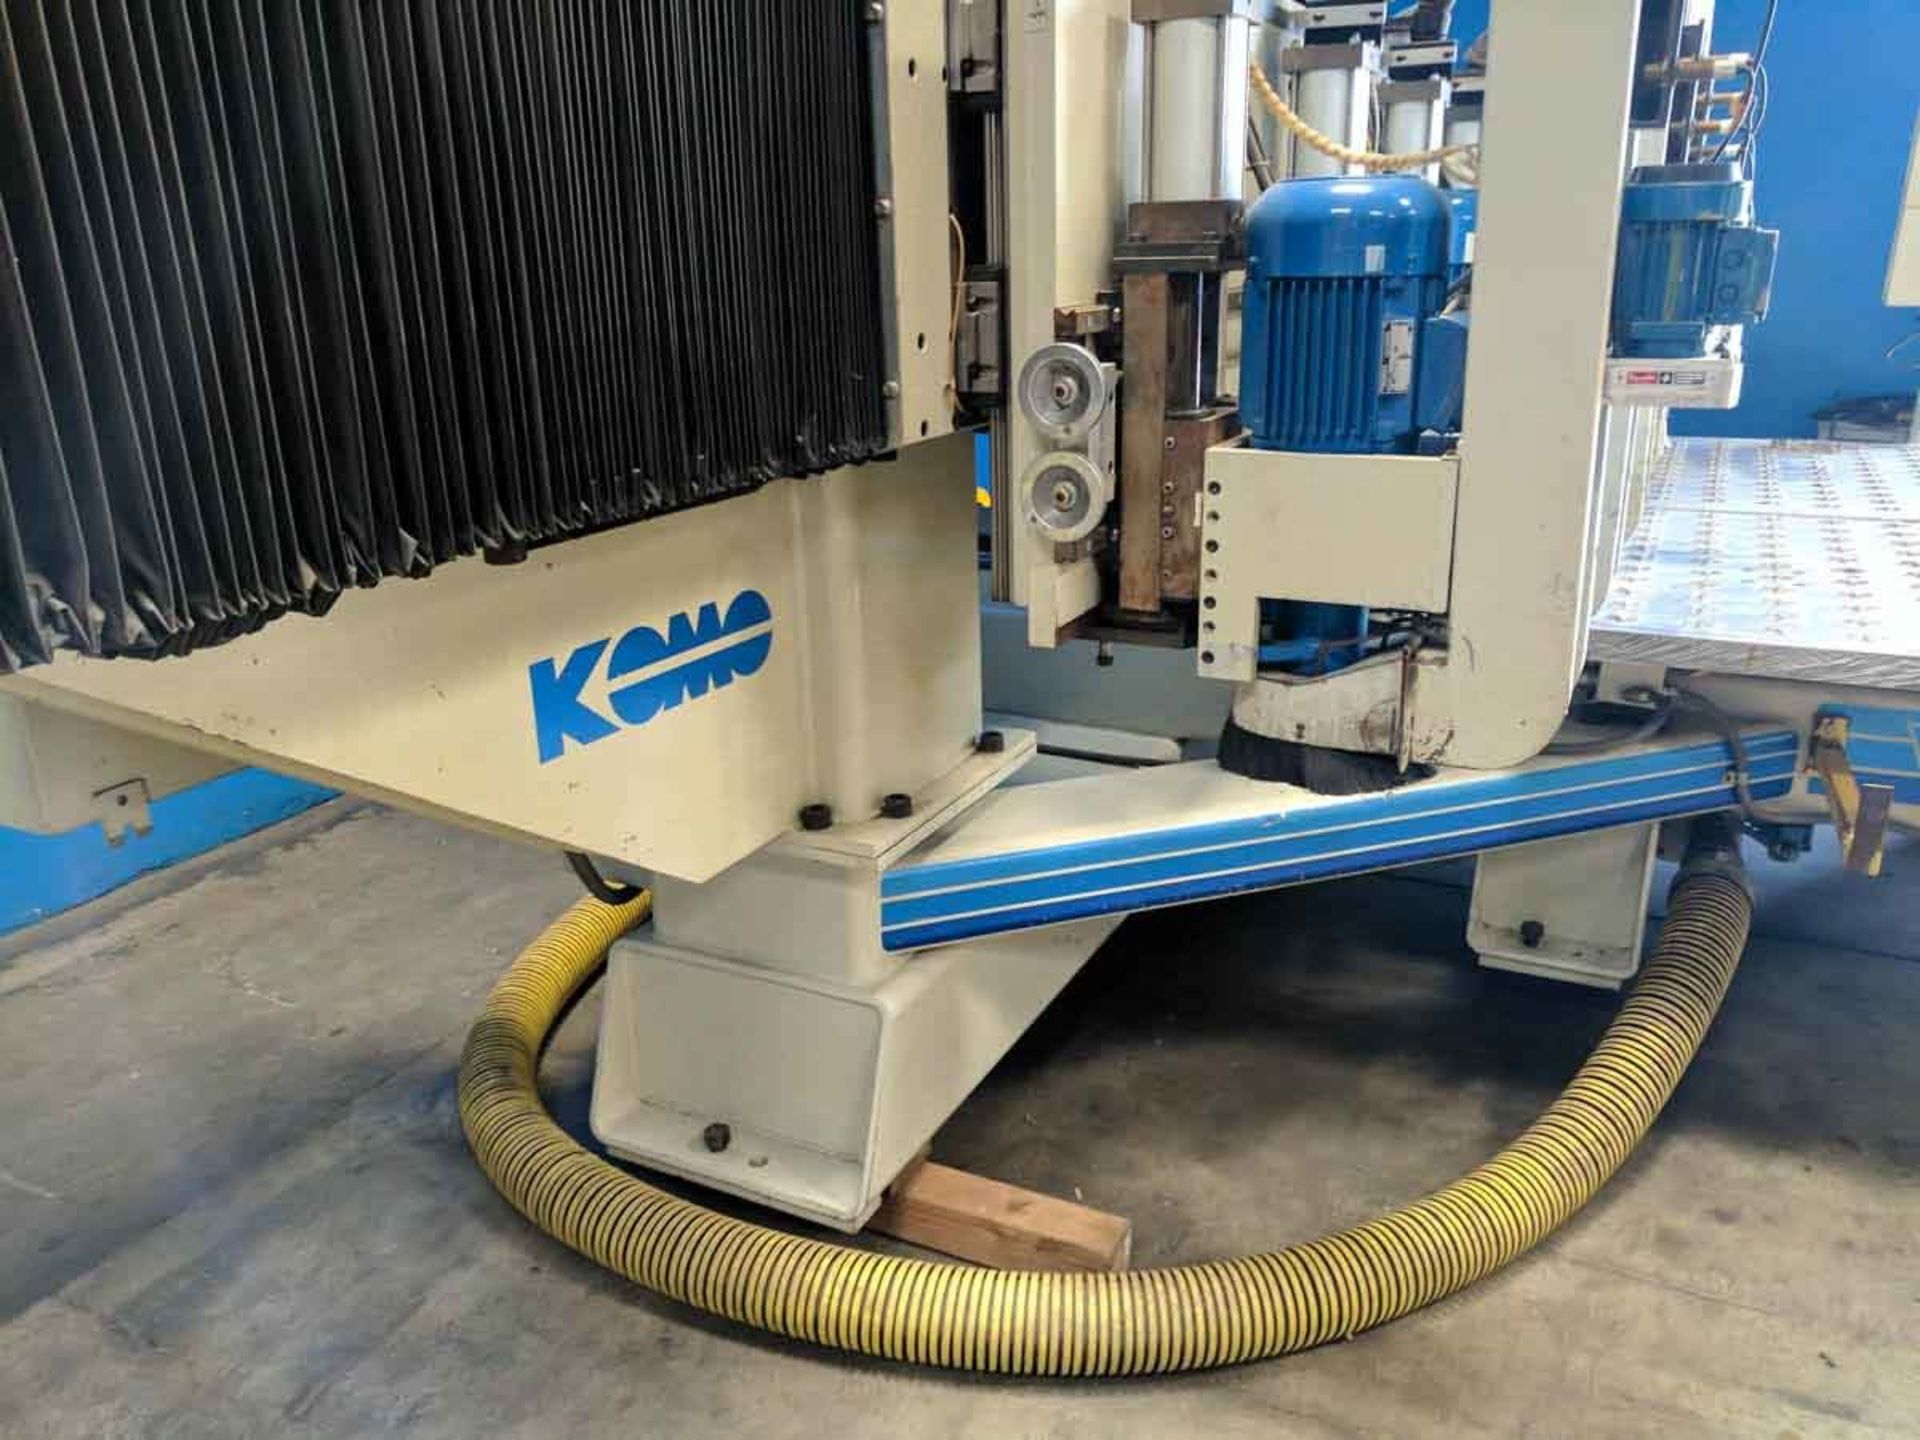 Komo VR805Q Fanuc CNC Metal Router 3 Axis 4 Spindle 96" x 60" Sheet Size - Located In: Huntington - Image 15 of 25